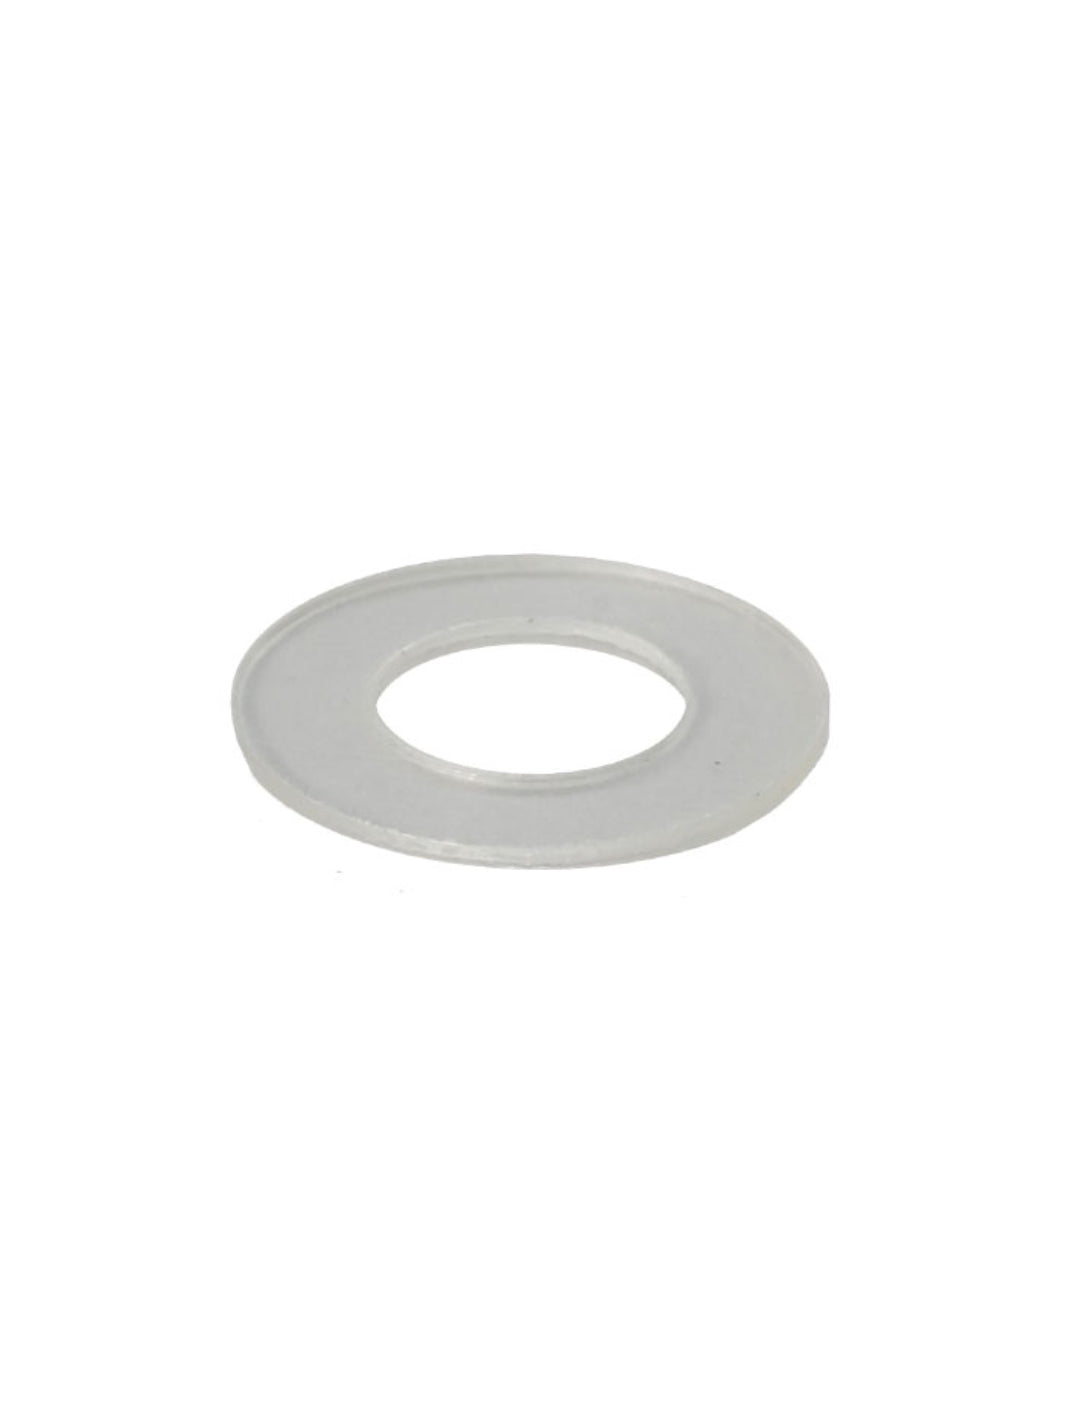 HARIO Skerton Replacement Washer (3-Pack)